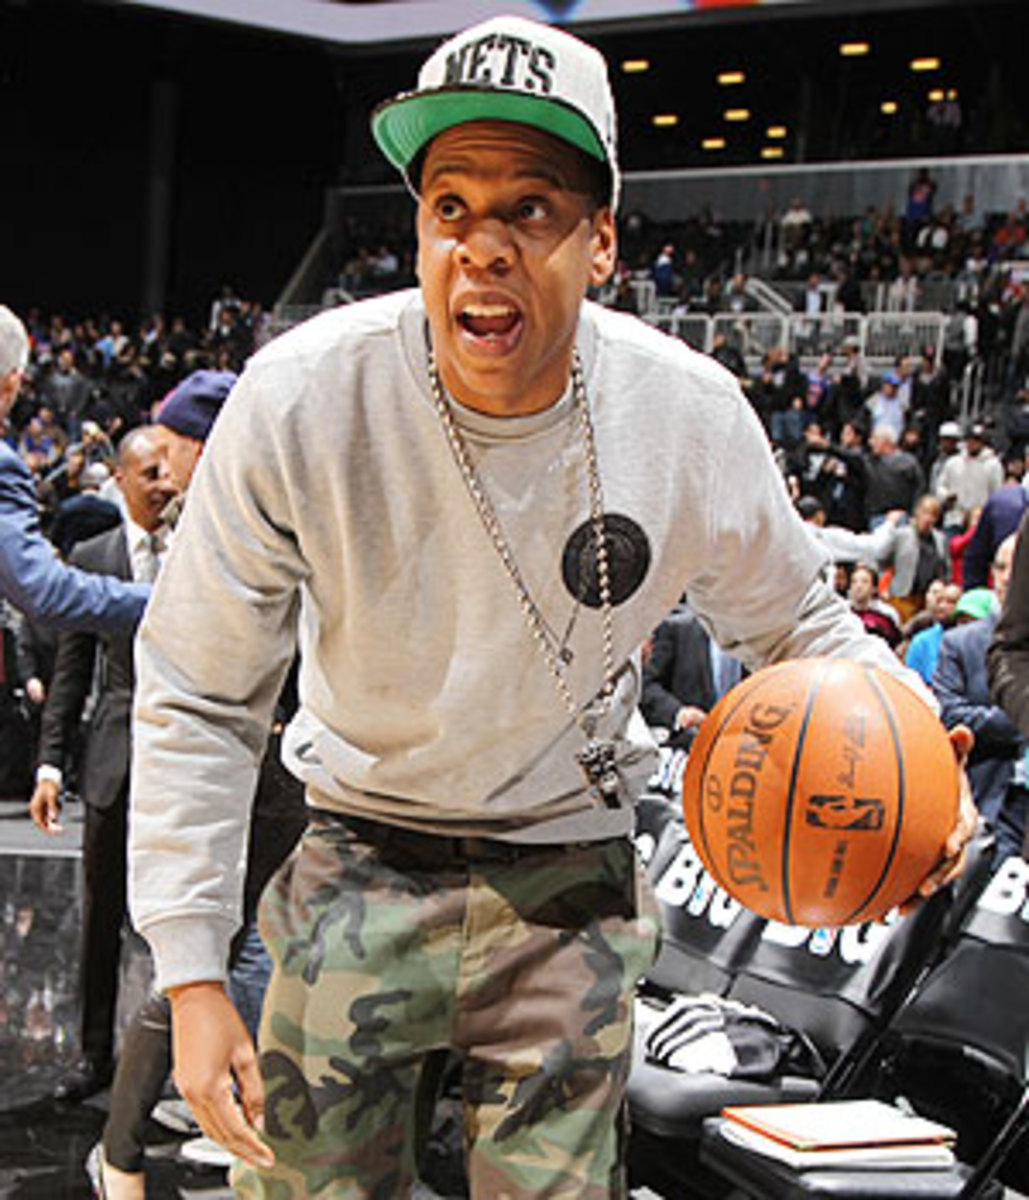 Court Vision: Jay-Z gloats after Nets top Knicks - Sports Illustrated